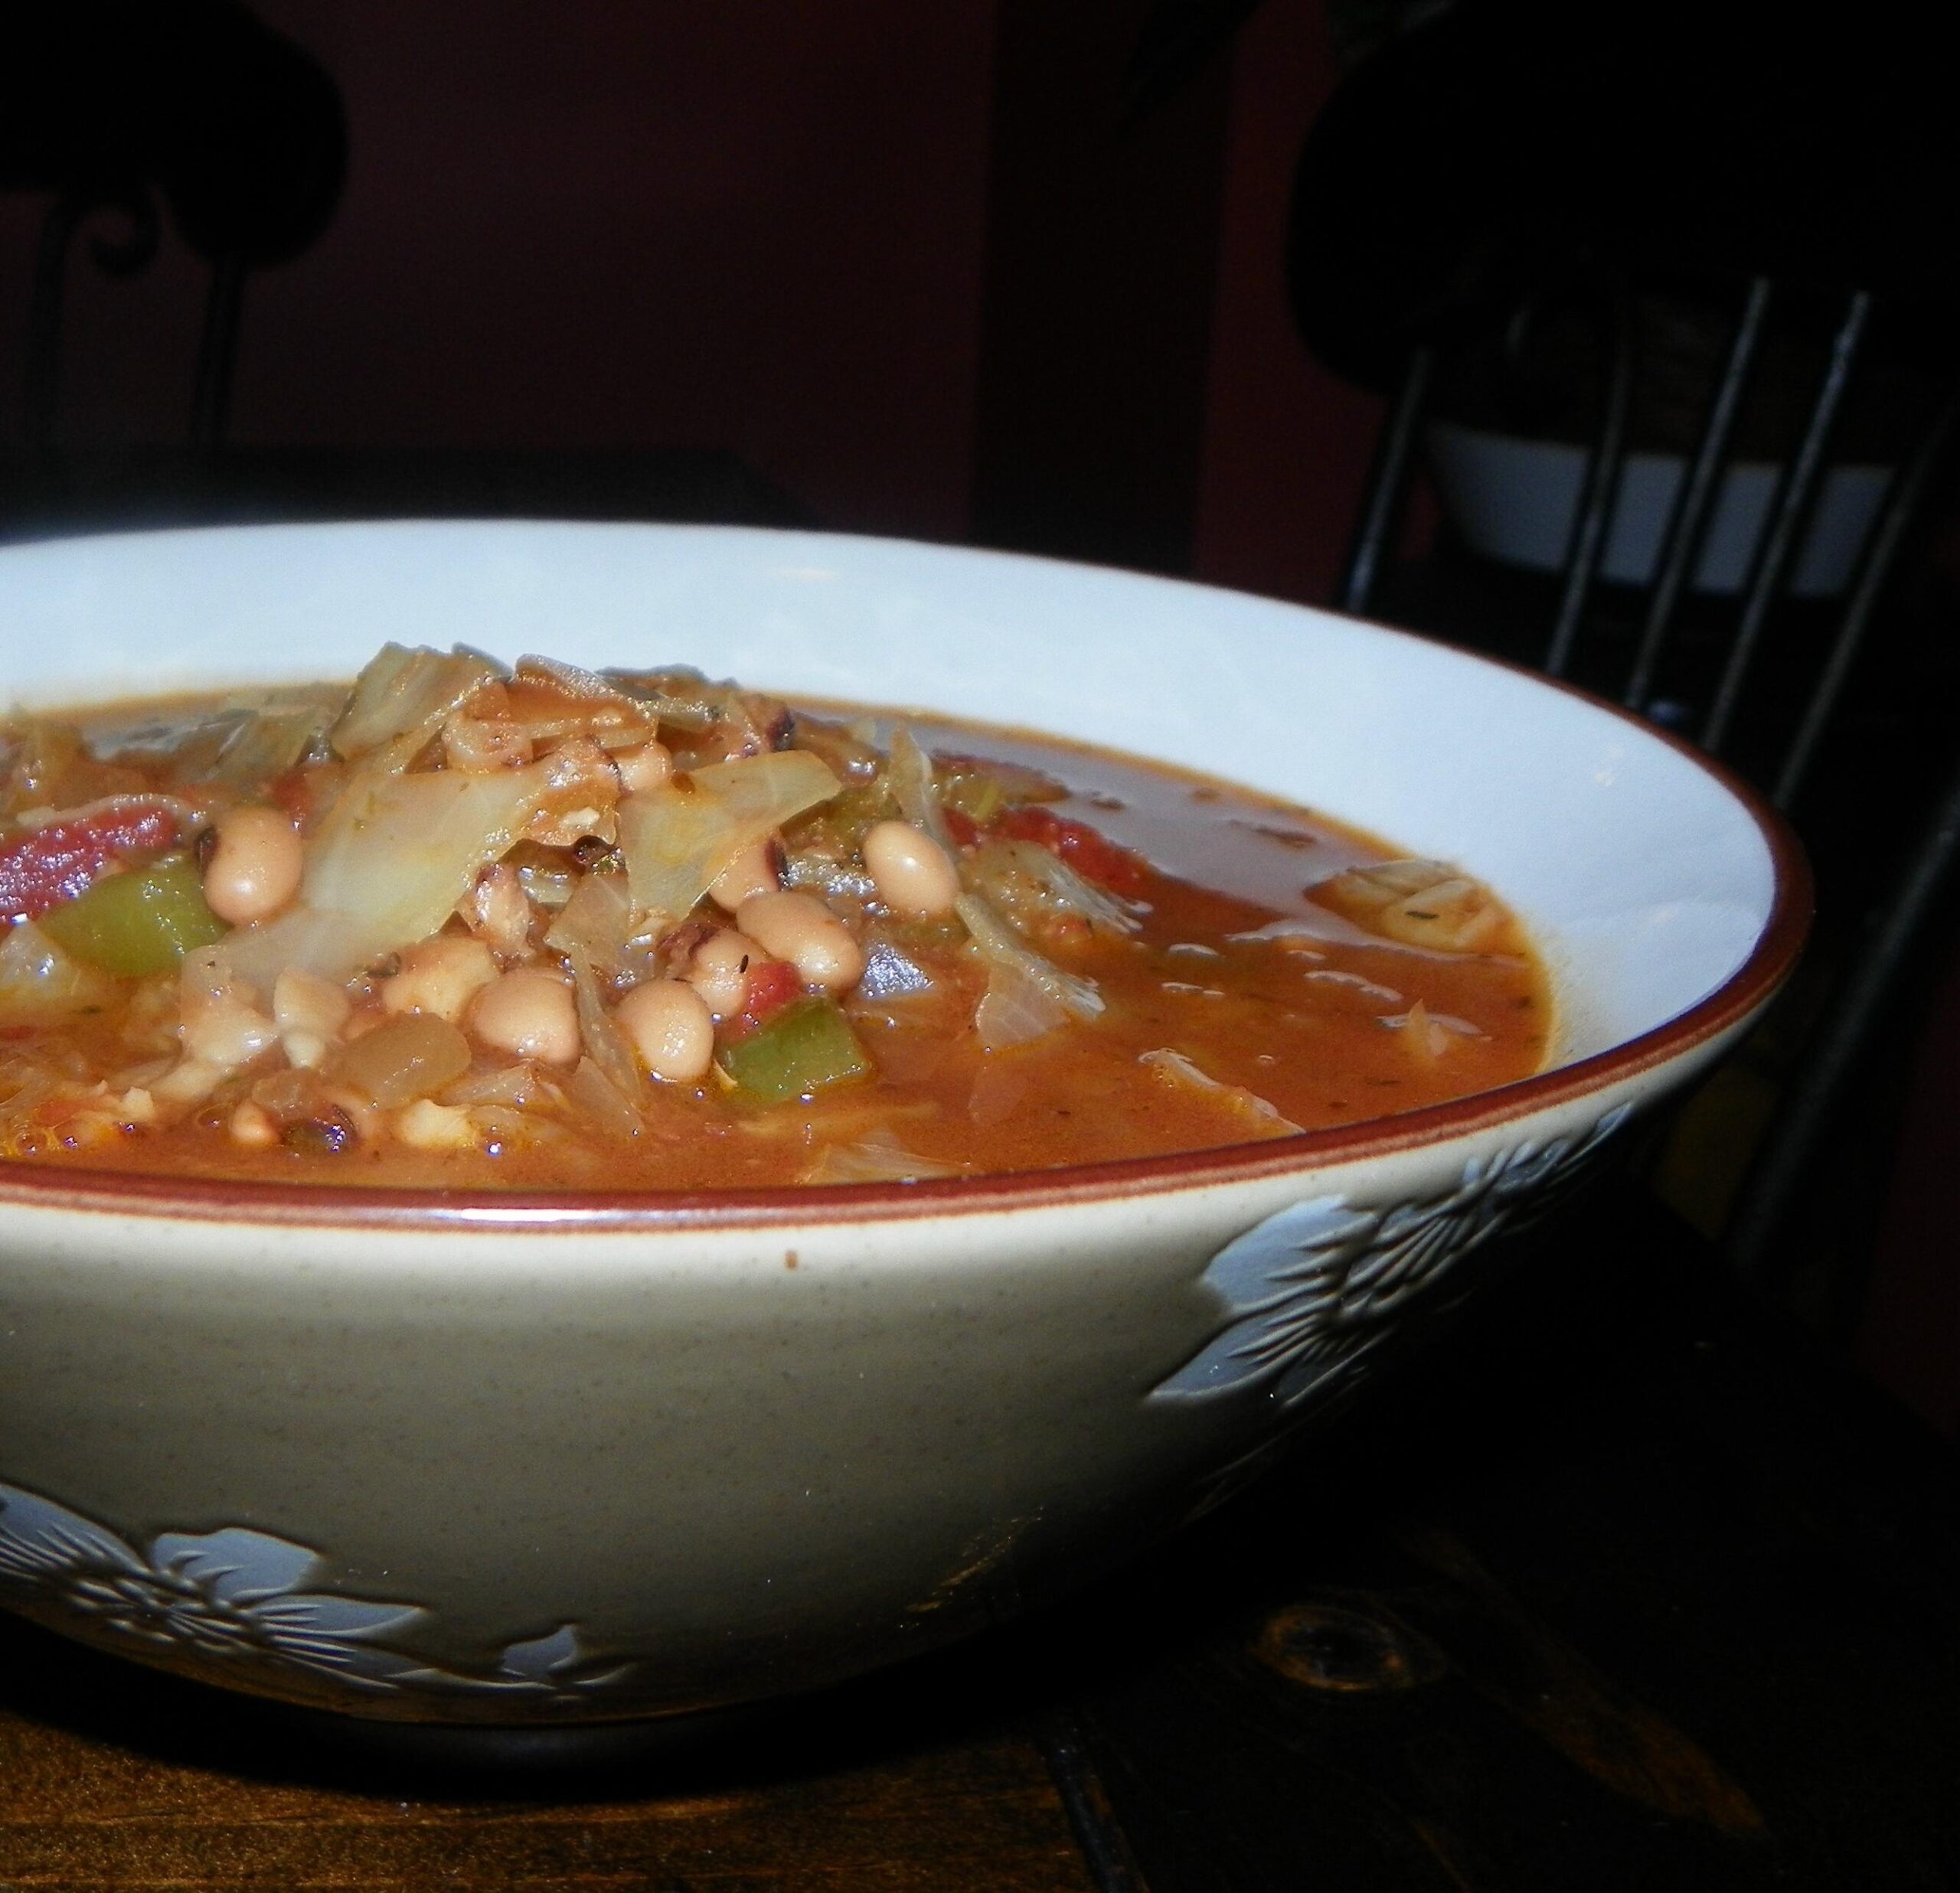 Sure, I can provide 11 creative photo captions for the Southern Style Black-Eyed Pea Soup recipe: